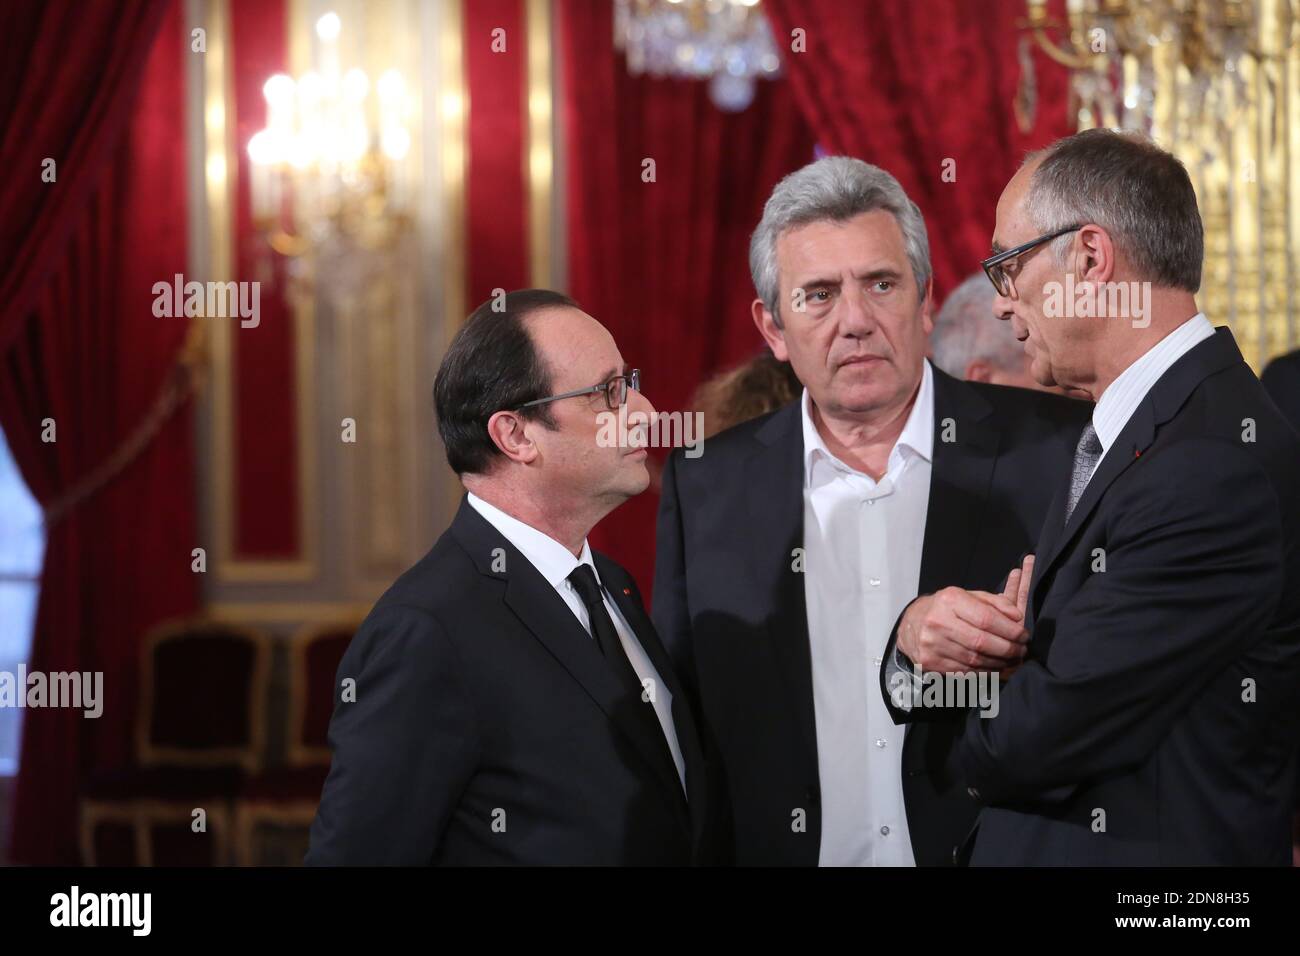 French President Francois Hollande (L) speaks with Claude Onesta (C), the head coach of the French National Handball team and Joel Delplanque, the president of the French Handball Federation during a reception hosted by President Hollande at the Elysee Palace to mark the victory of the French National Handball team in the 2015 World Men's Handball Championship held in Qatar, in Paris, France on February 3, 2015. Photo Pool by Hamilton/ABACAPRESS.COM Stock Photo